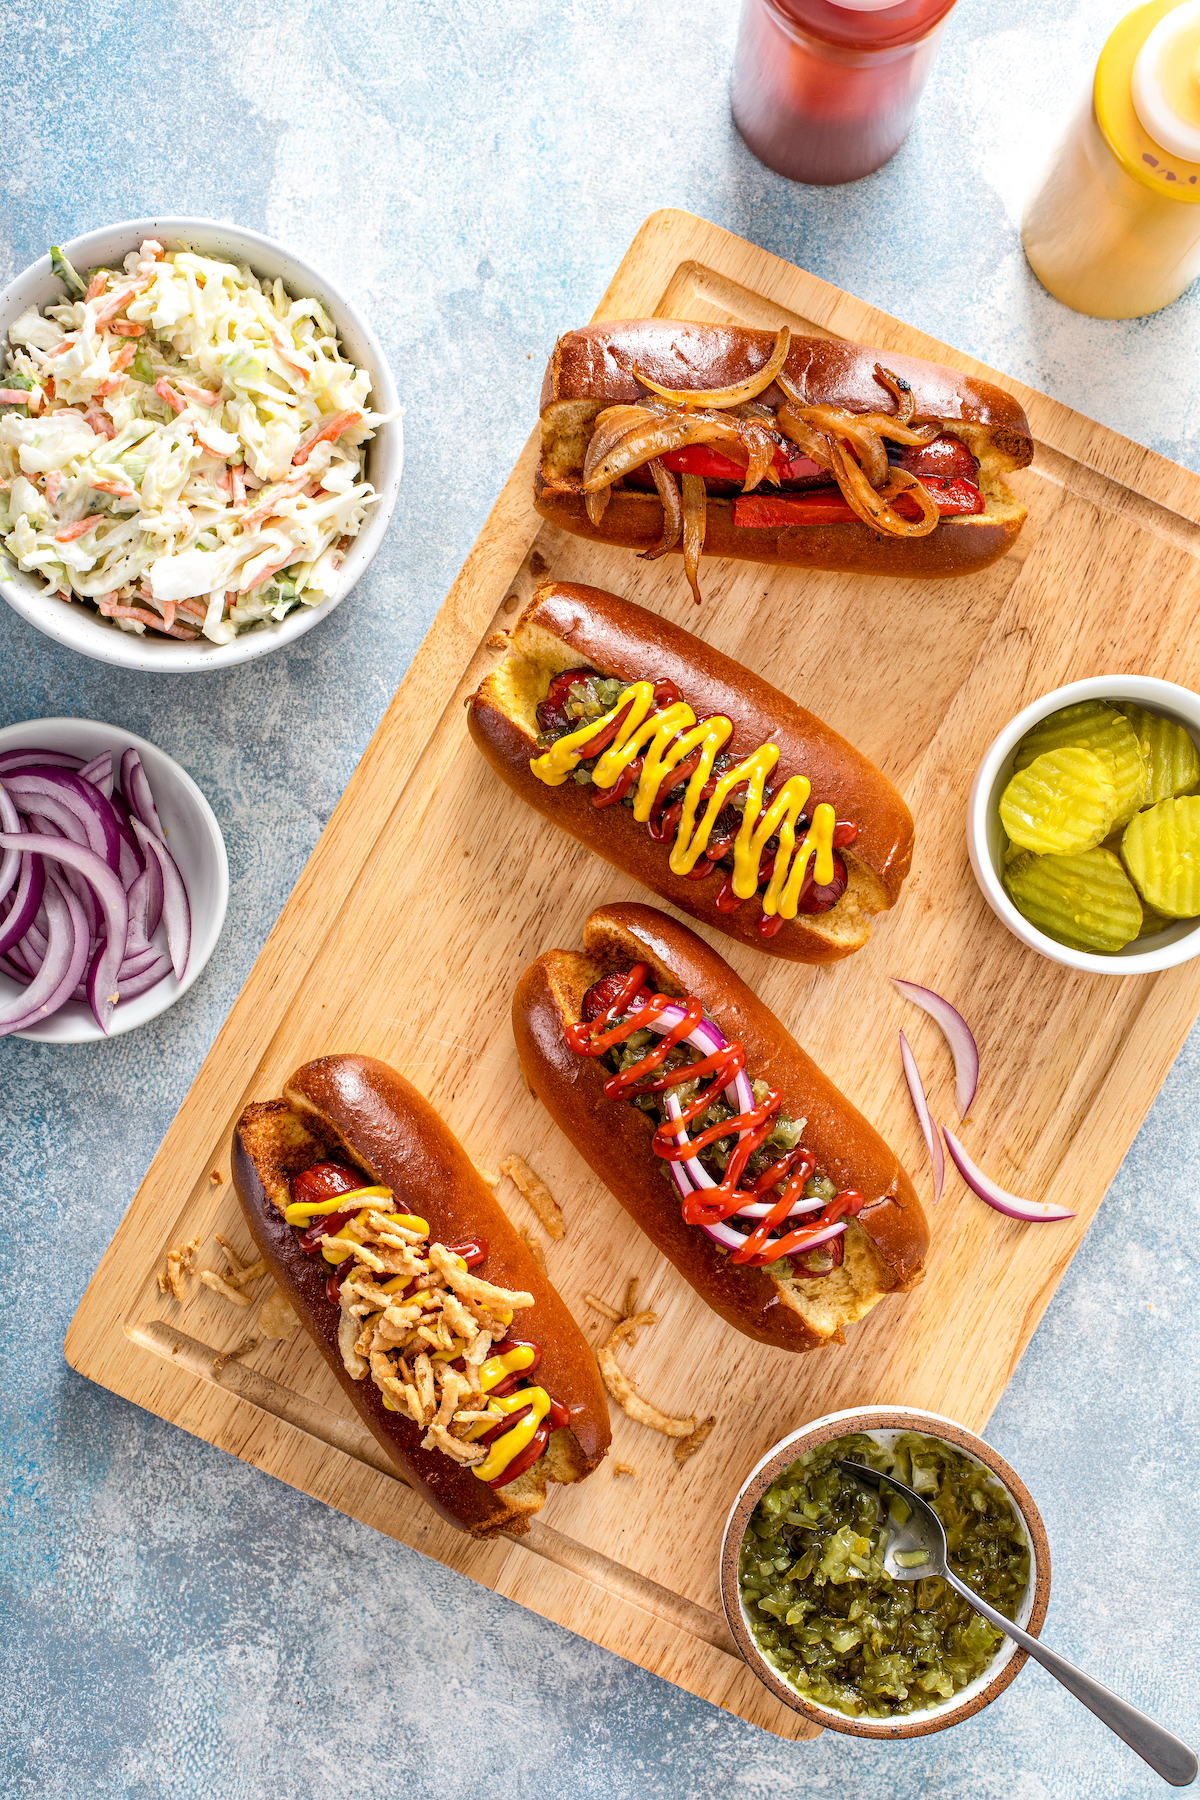 Top view of air fryer hot dogs on a wooden cutting board garnished with various hot dog toppings.